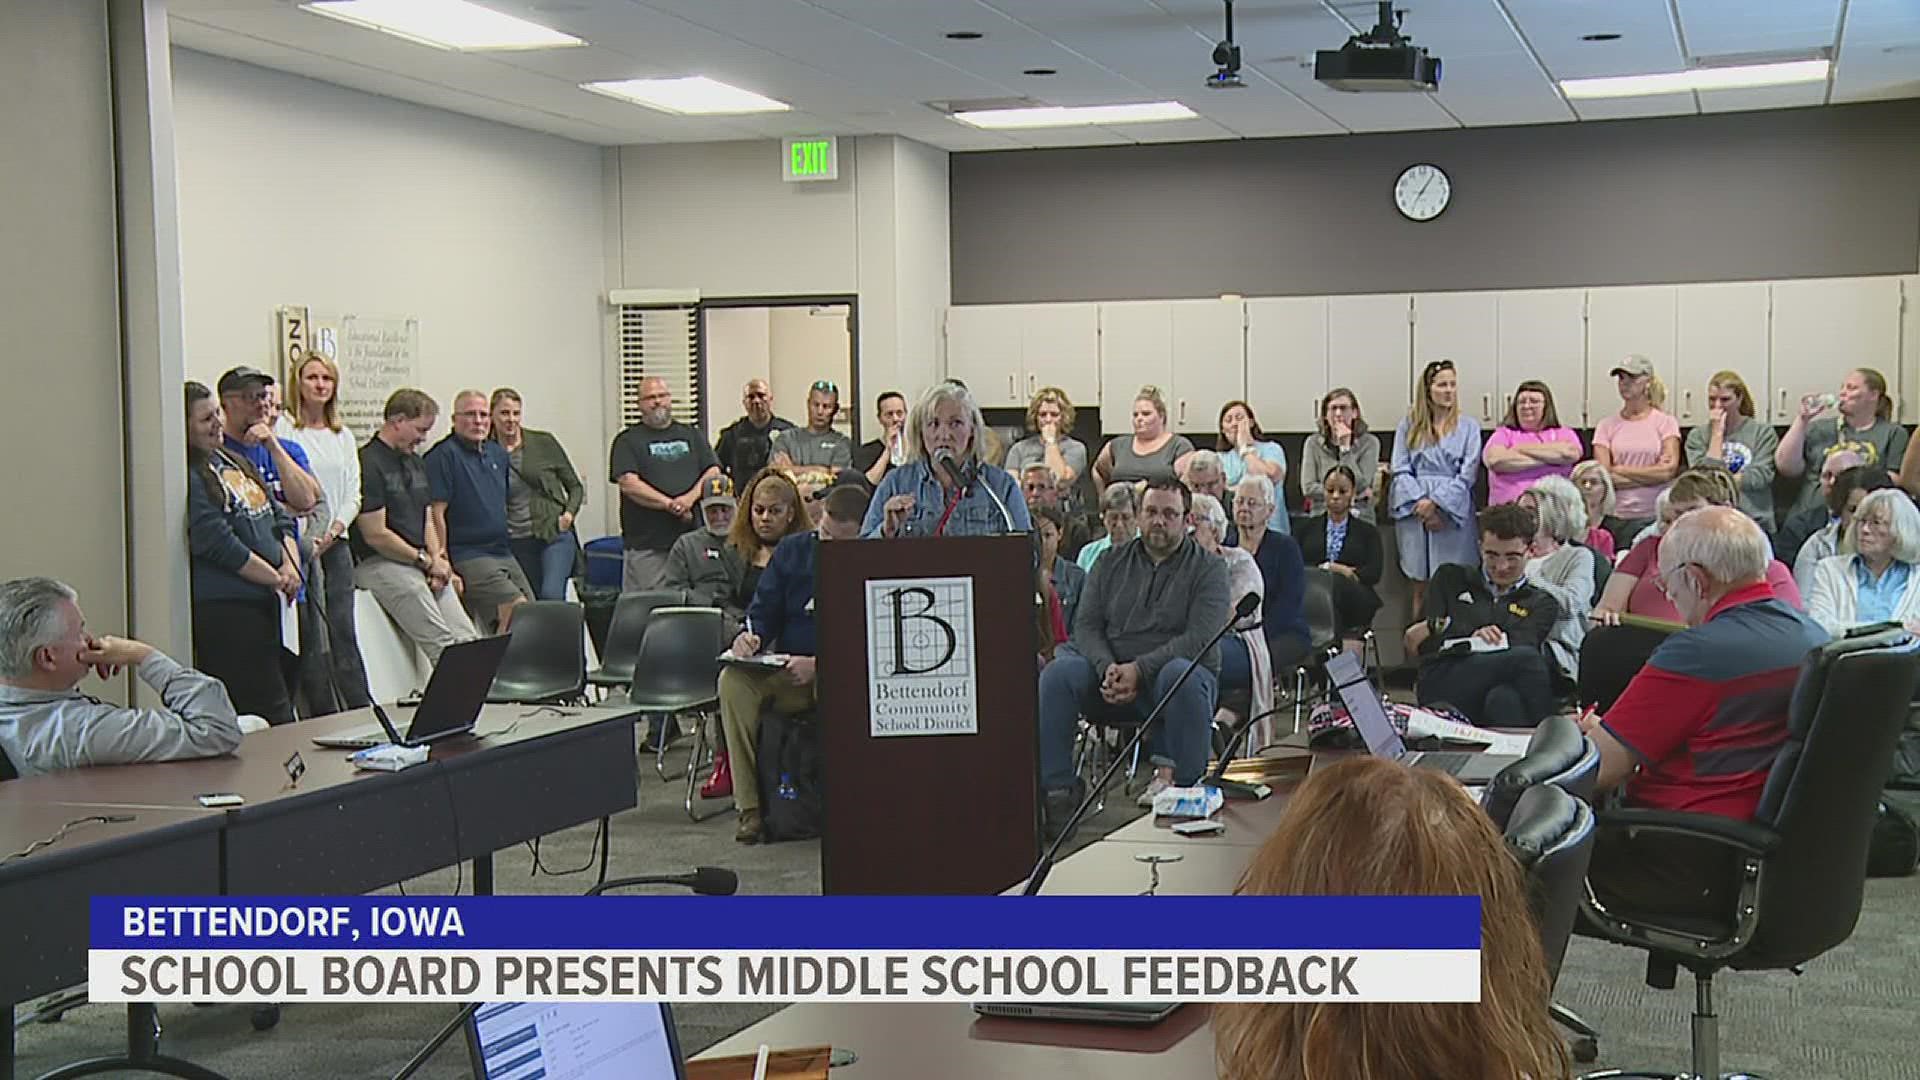 Less than 24 hours after hearing suggestions from parents, the school board provided an update with some possible solutions.